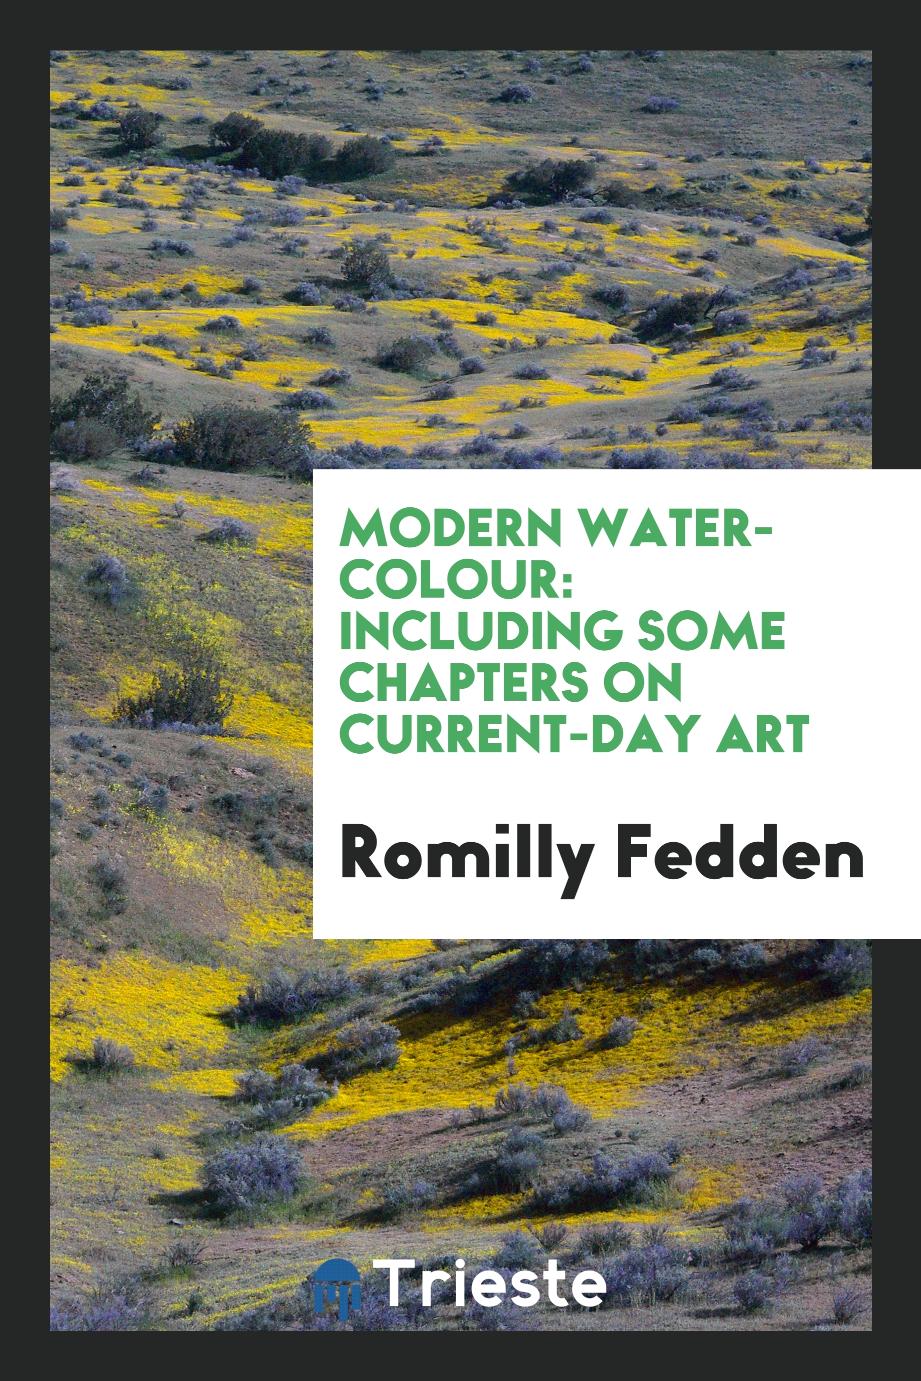 Modern Water-Colour: Including Some Chapters on Current-Day Art